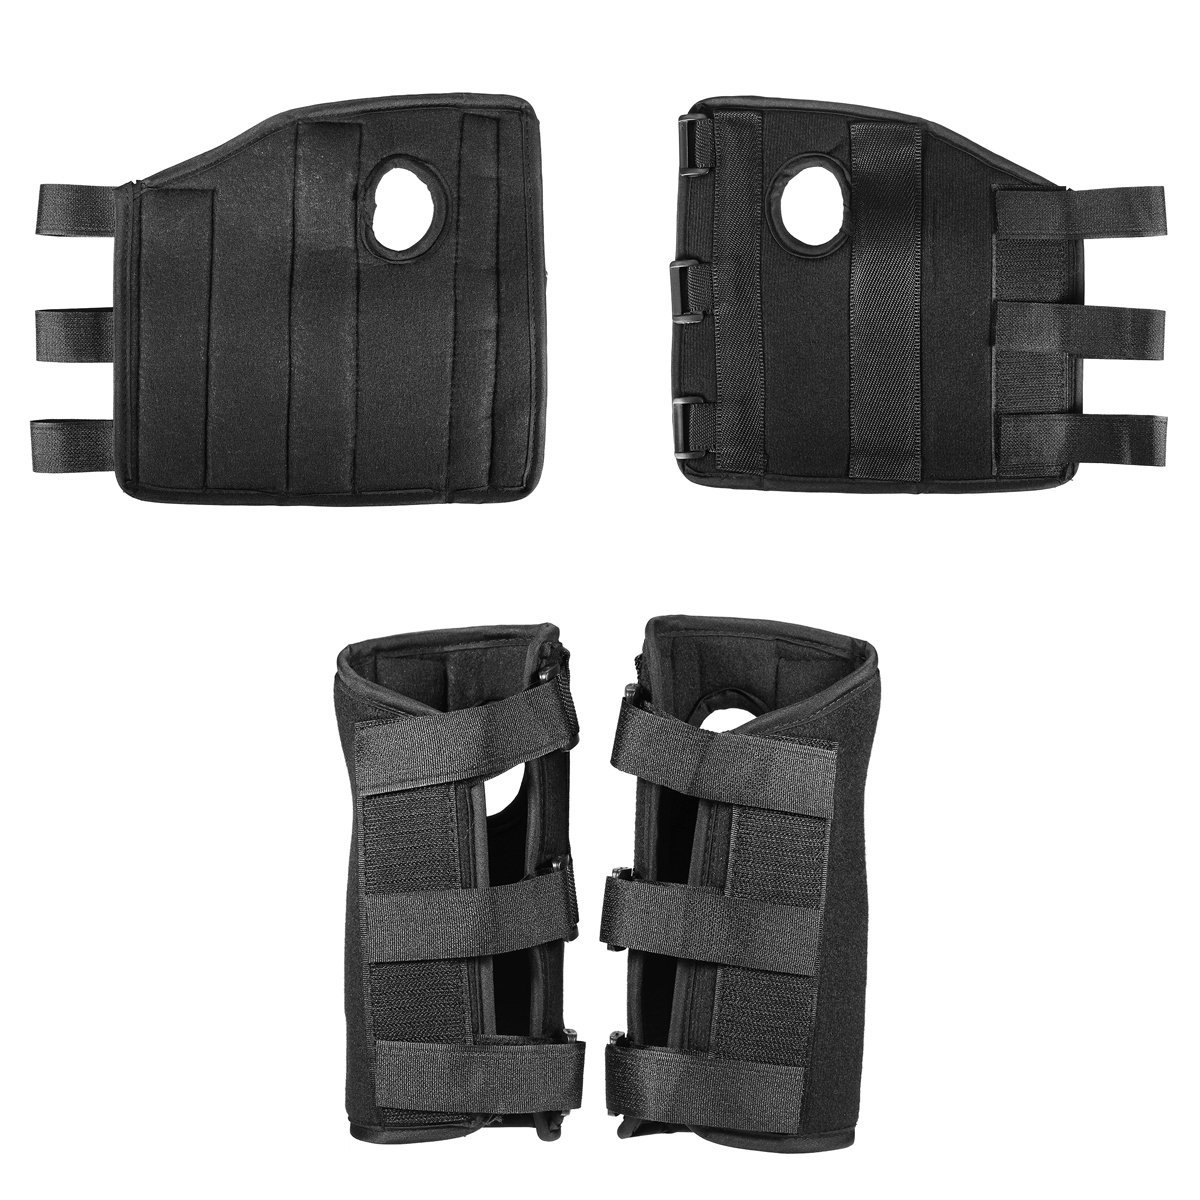 1Pair-Right-Left-Hands-Breathable-Night-Wrist-Brace-Sleep-Support-Carpal-Tunnel-Comfort-Composite-Fa-1212318-6